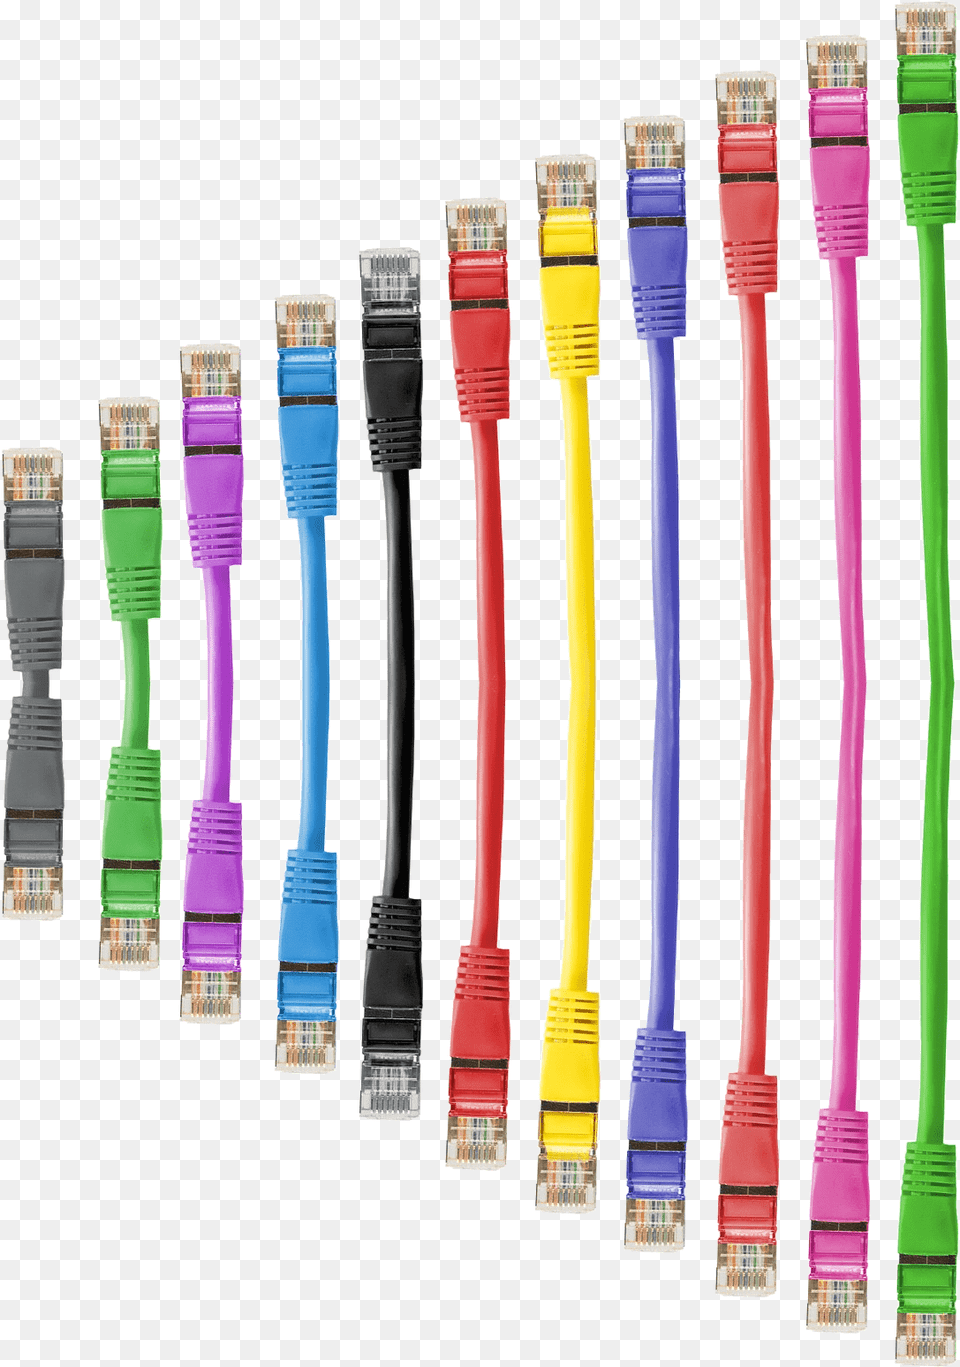 Computer Cables Computer Cables, Cable, Mortar Shell, Weapon Free Png Download